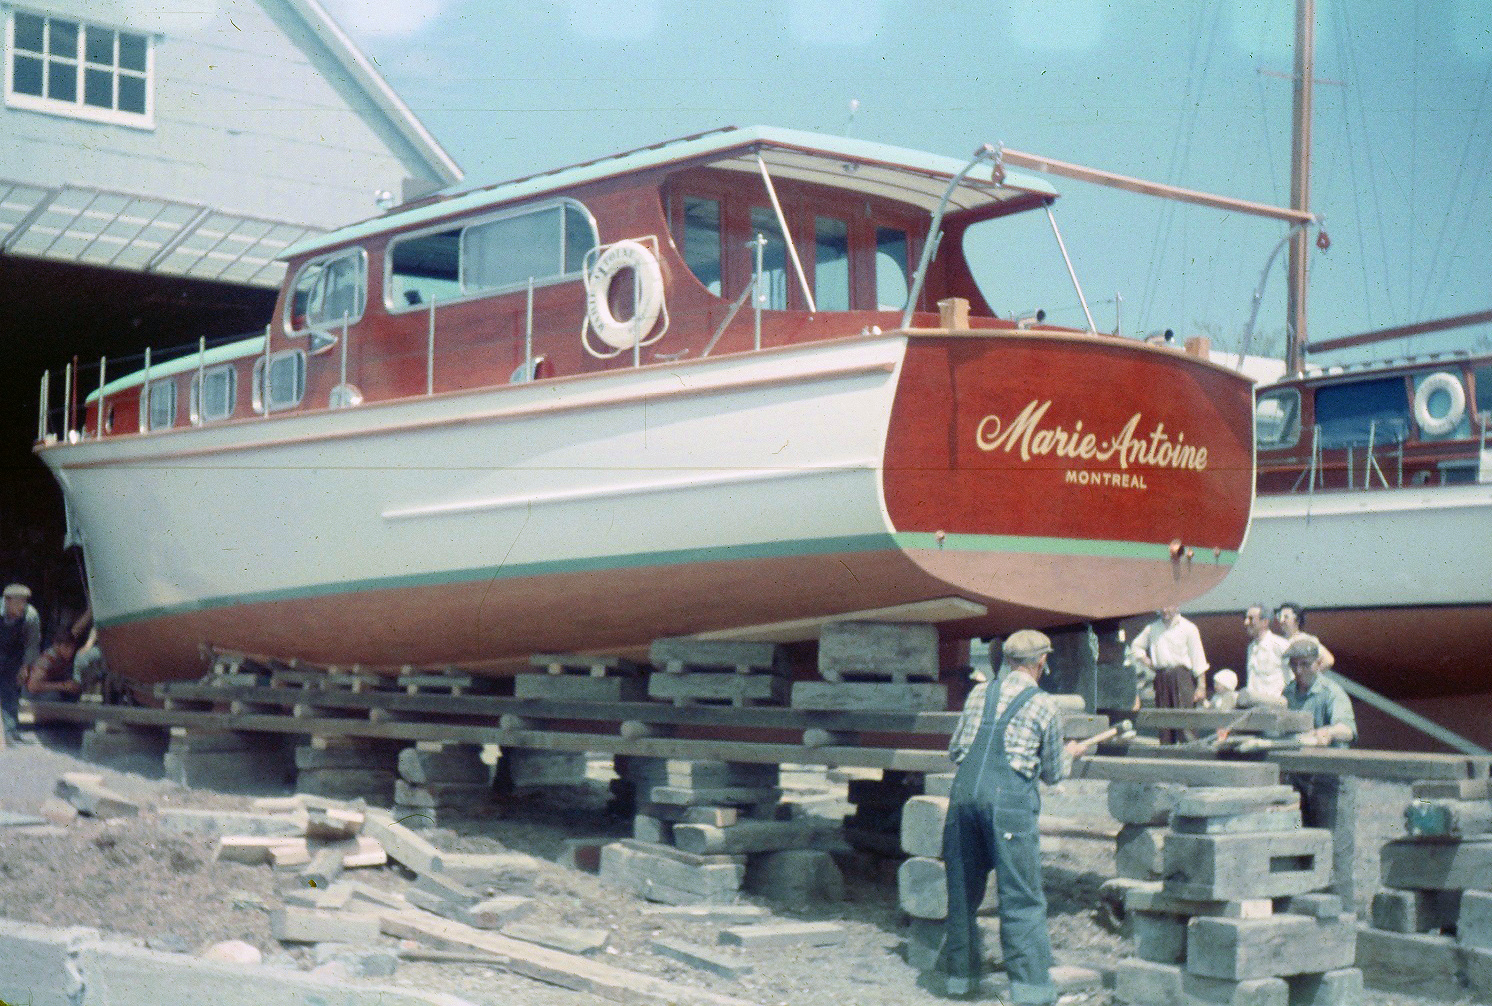 Color photograph where a white painted wooden yacht with mahogany cabin and aft is installed on blocks and boards at the exit of a hangar. The inscription "Marie-Antoine, MONTREAL" is at the back of the boat. F-X handles a hammer against the boards of the structure under the boat, helped by another man. Three adults and one child watch the scene from the side of the boat. A sailboat is partially visible in the background.